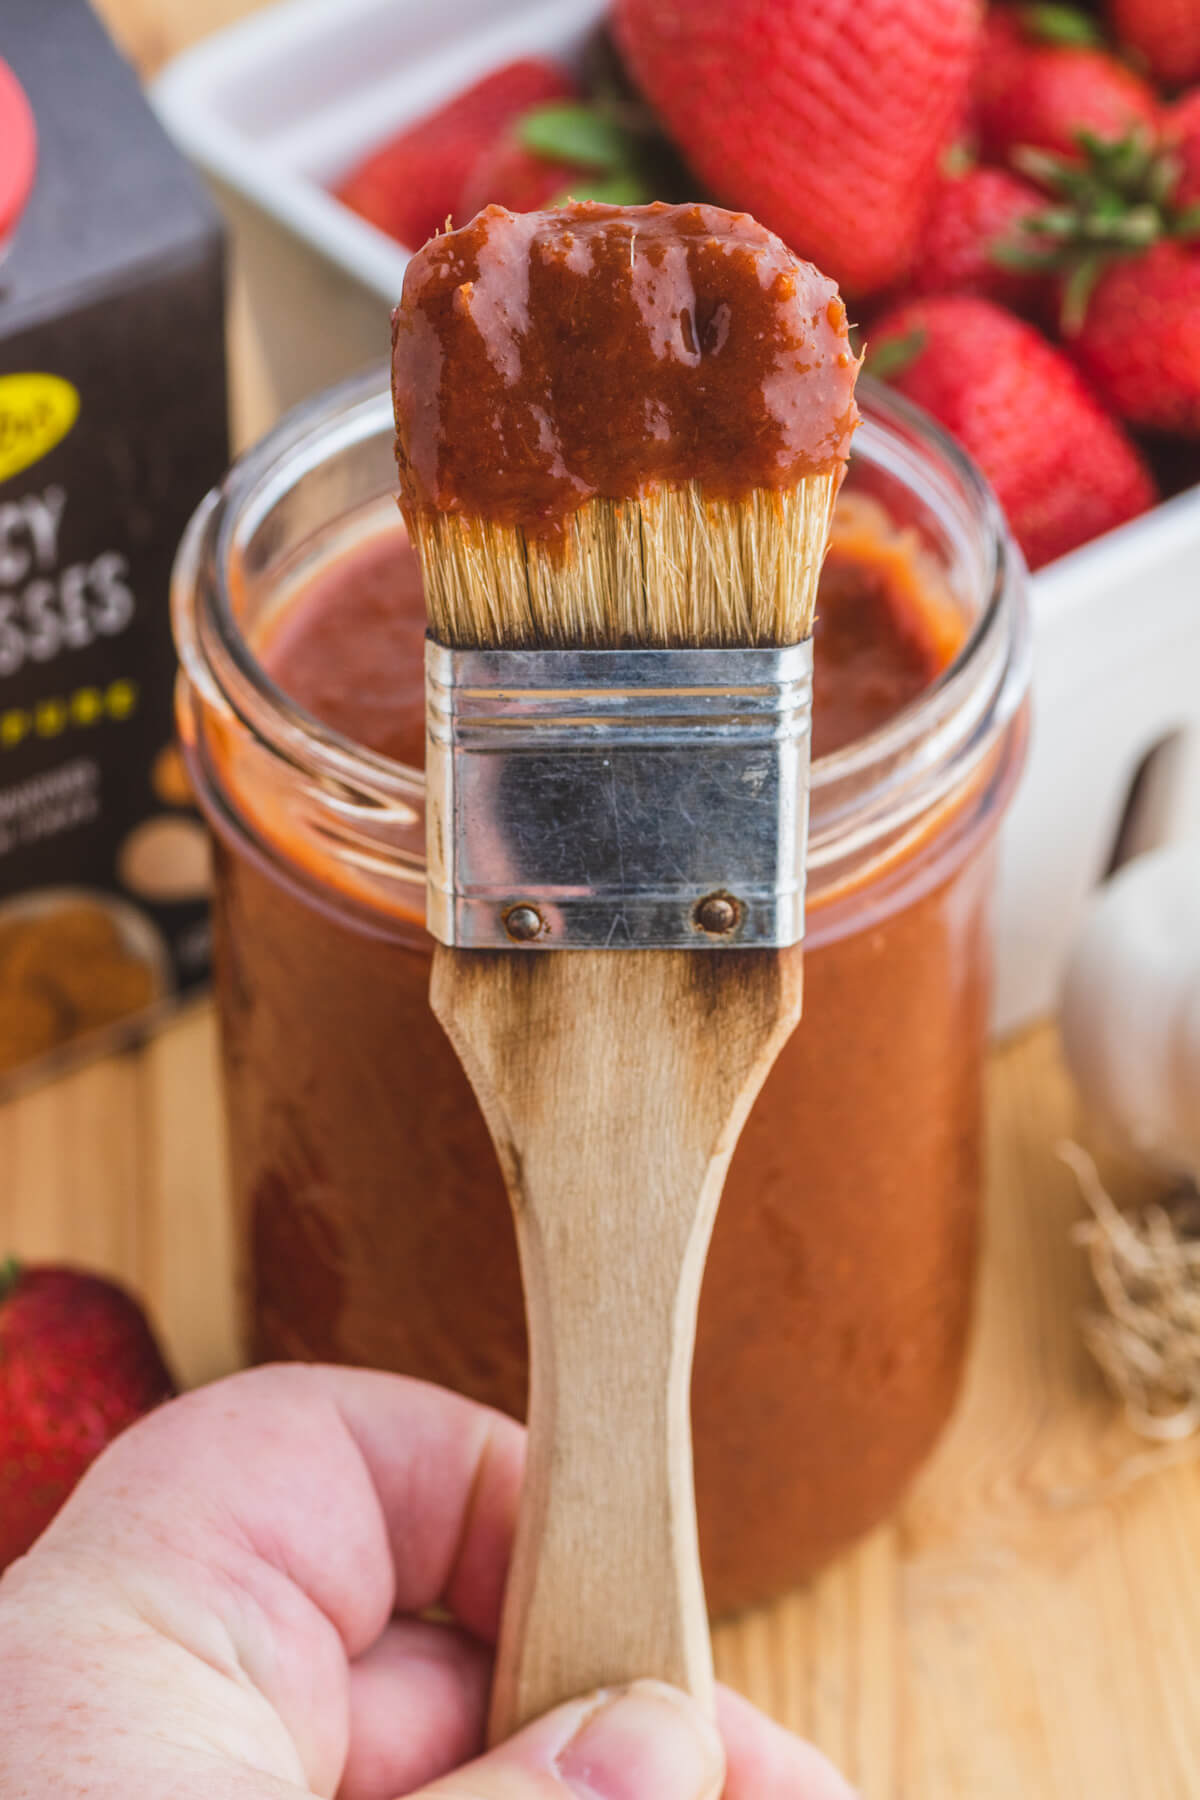 A brush coated in homemade barbecue sauce.
